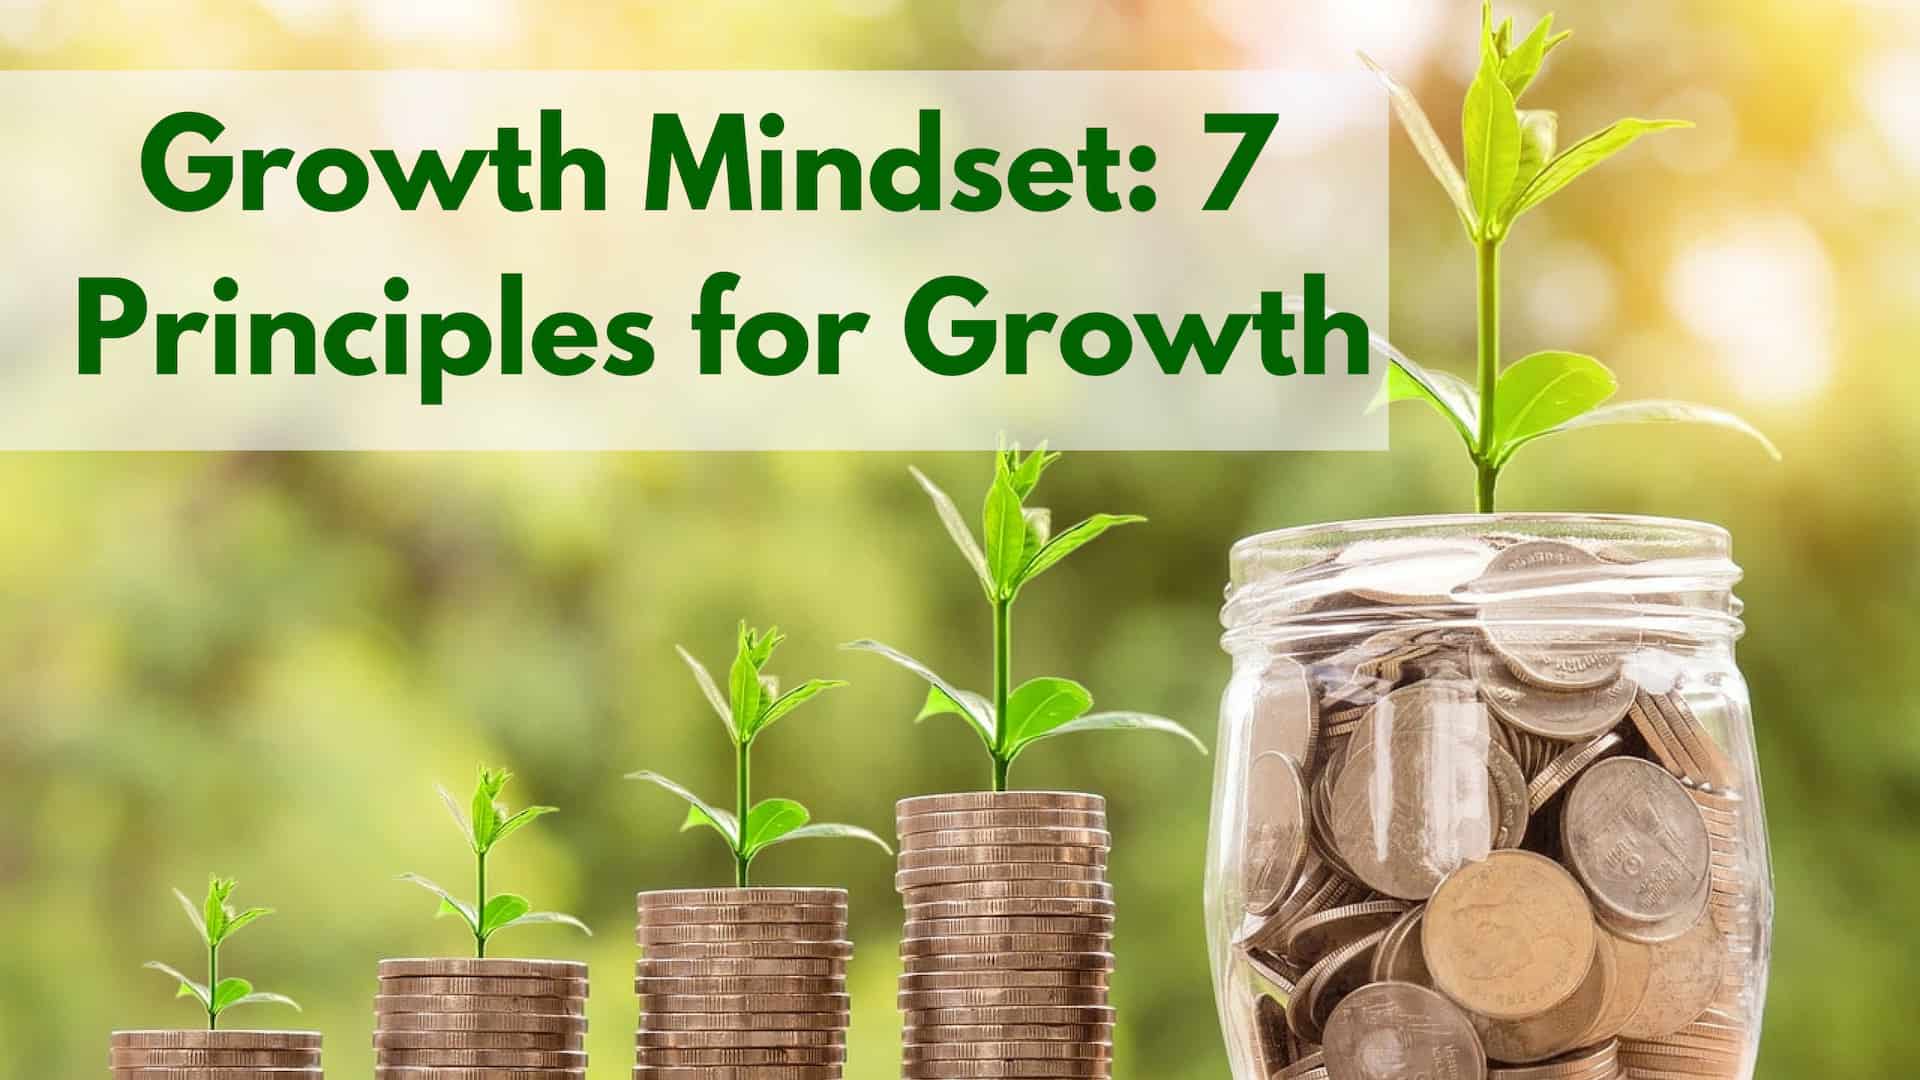 Growth Mindset: 7 Principles For Growth